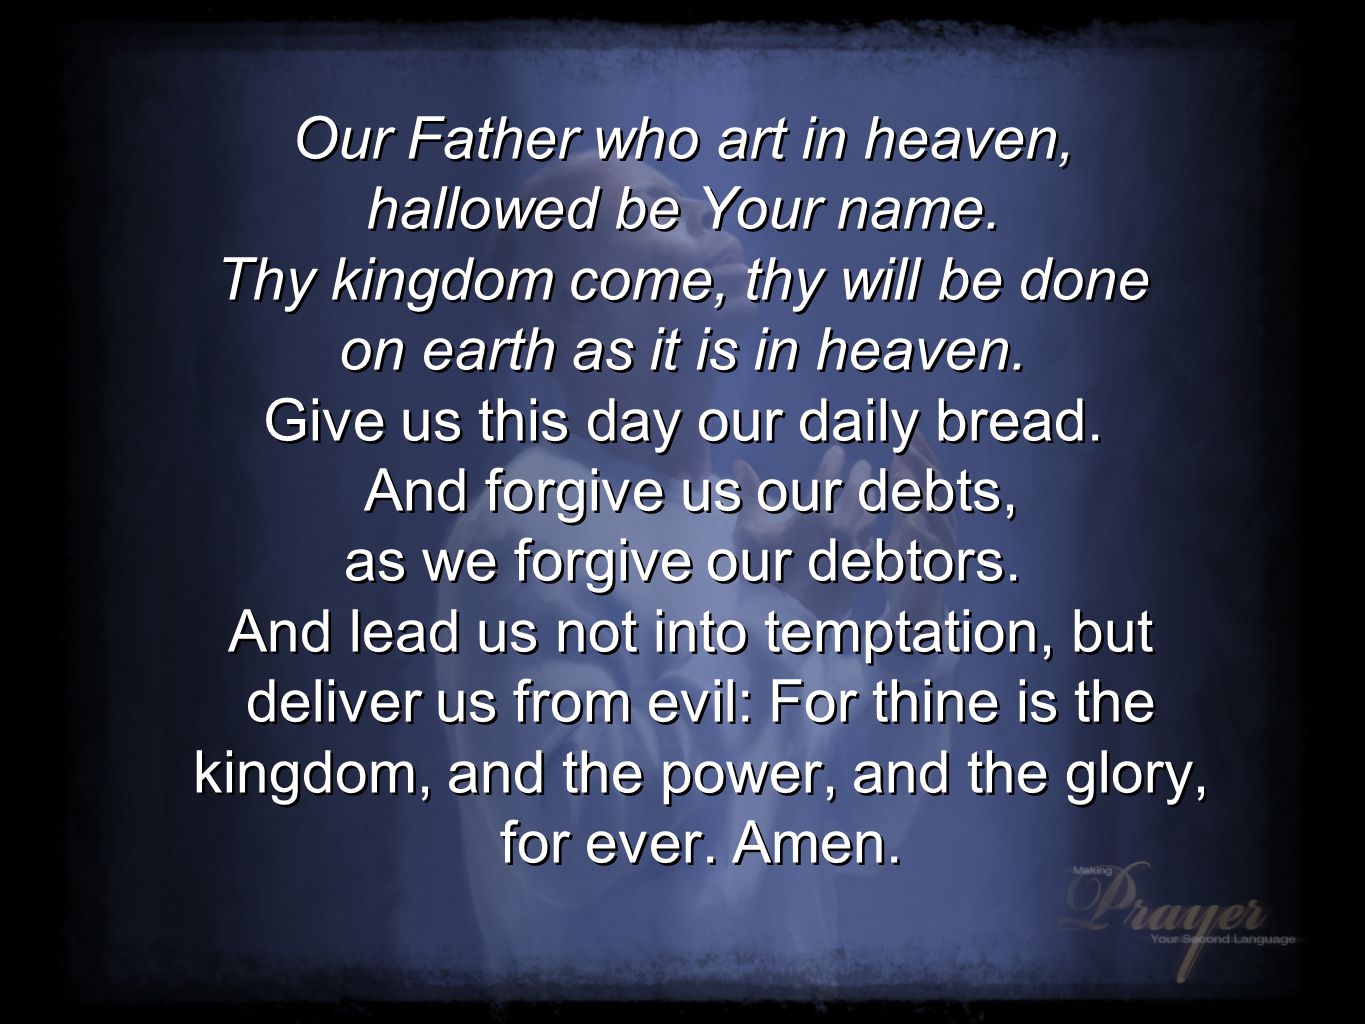 Our Father who art in heaven, hallowed be Your name.